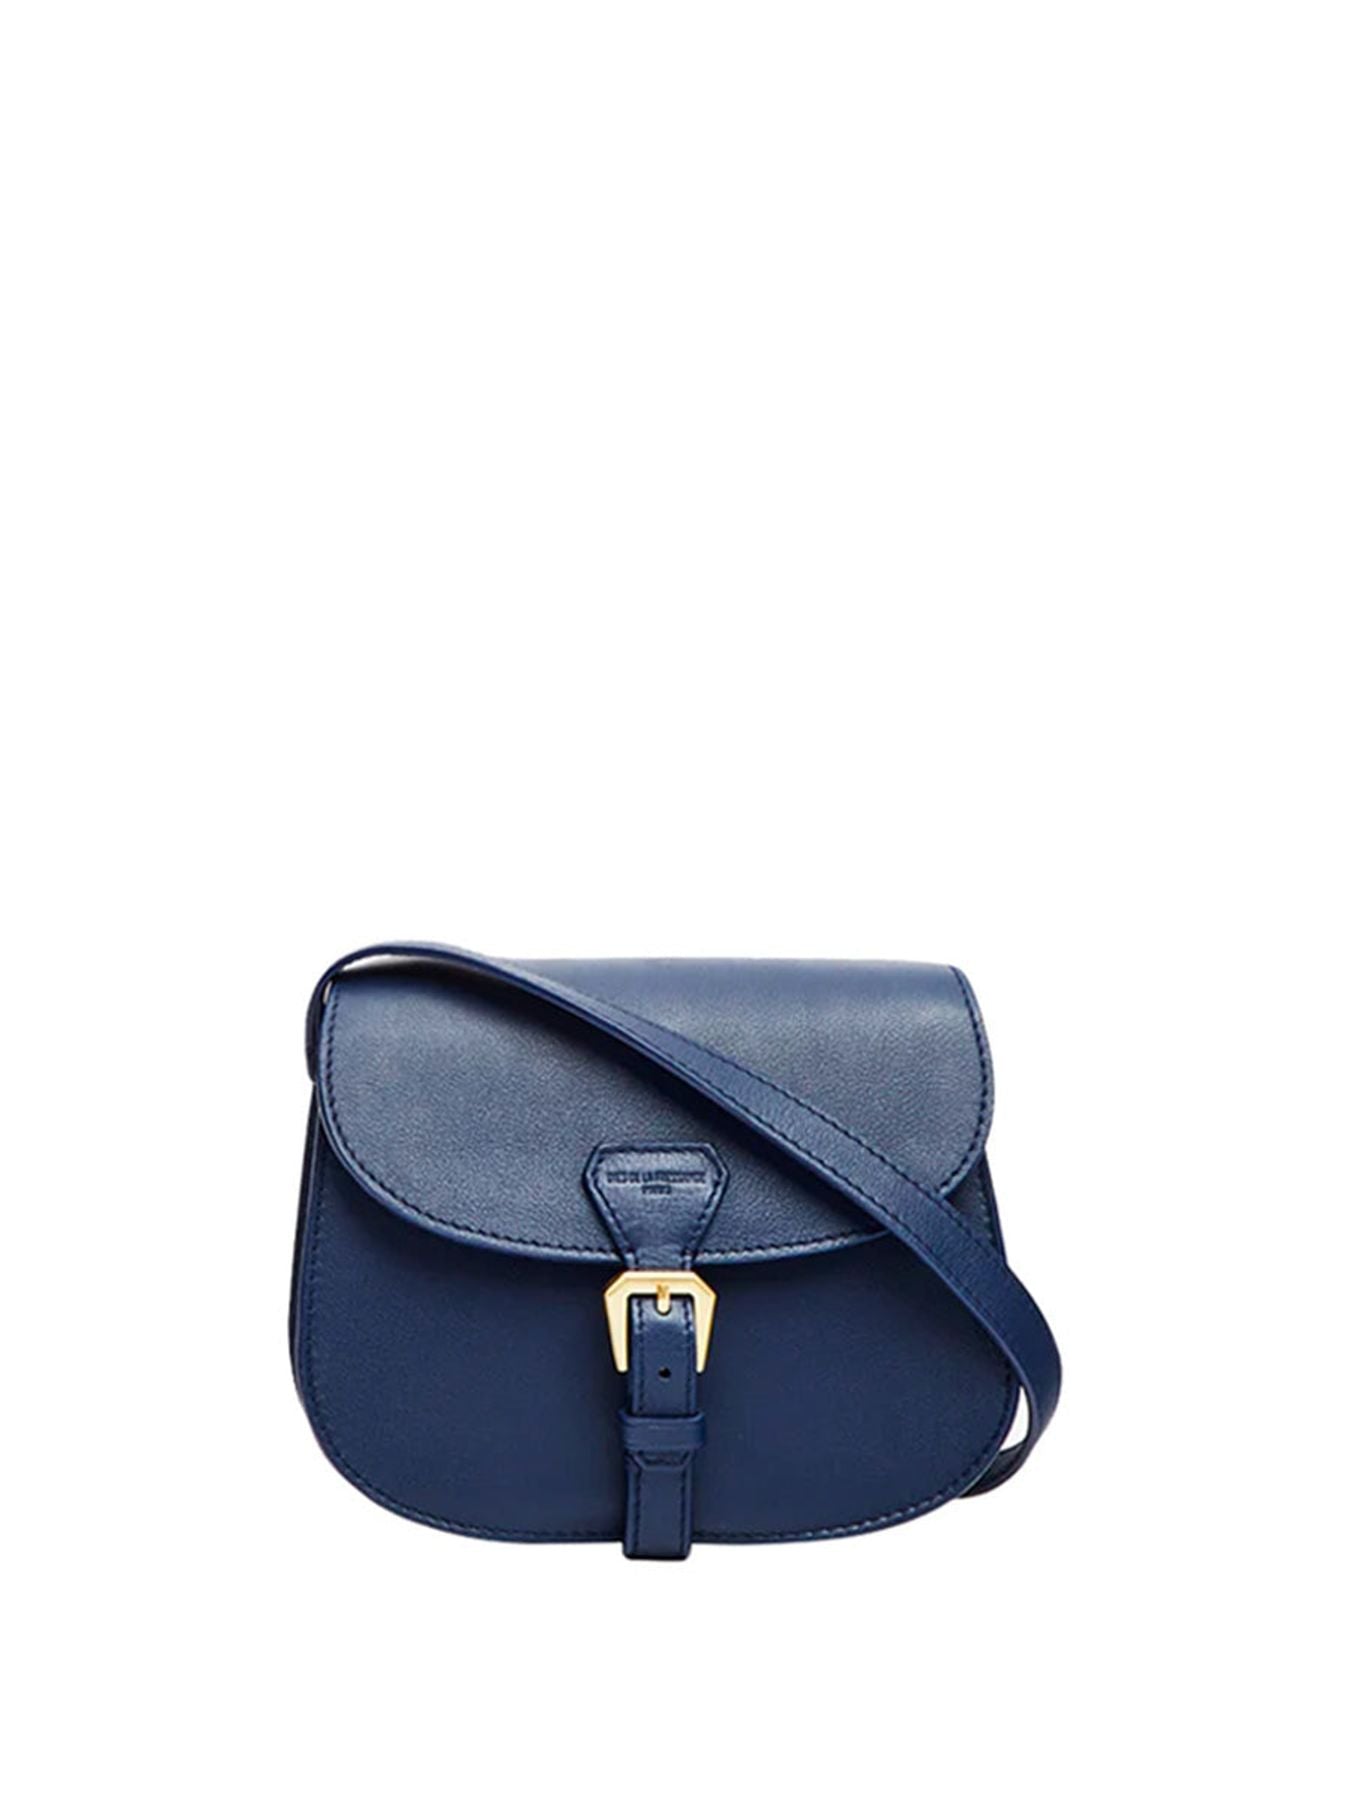 bag-baby-flaneur-leather-blue-navy